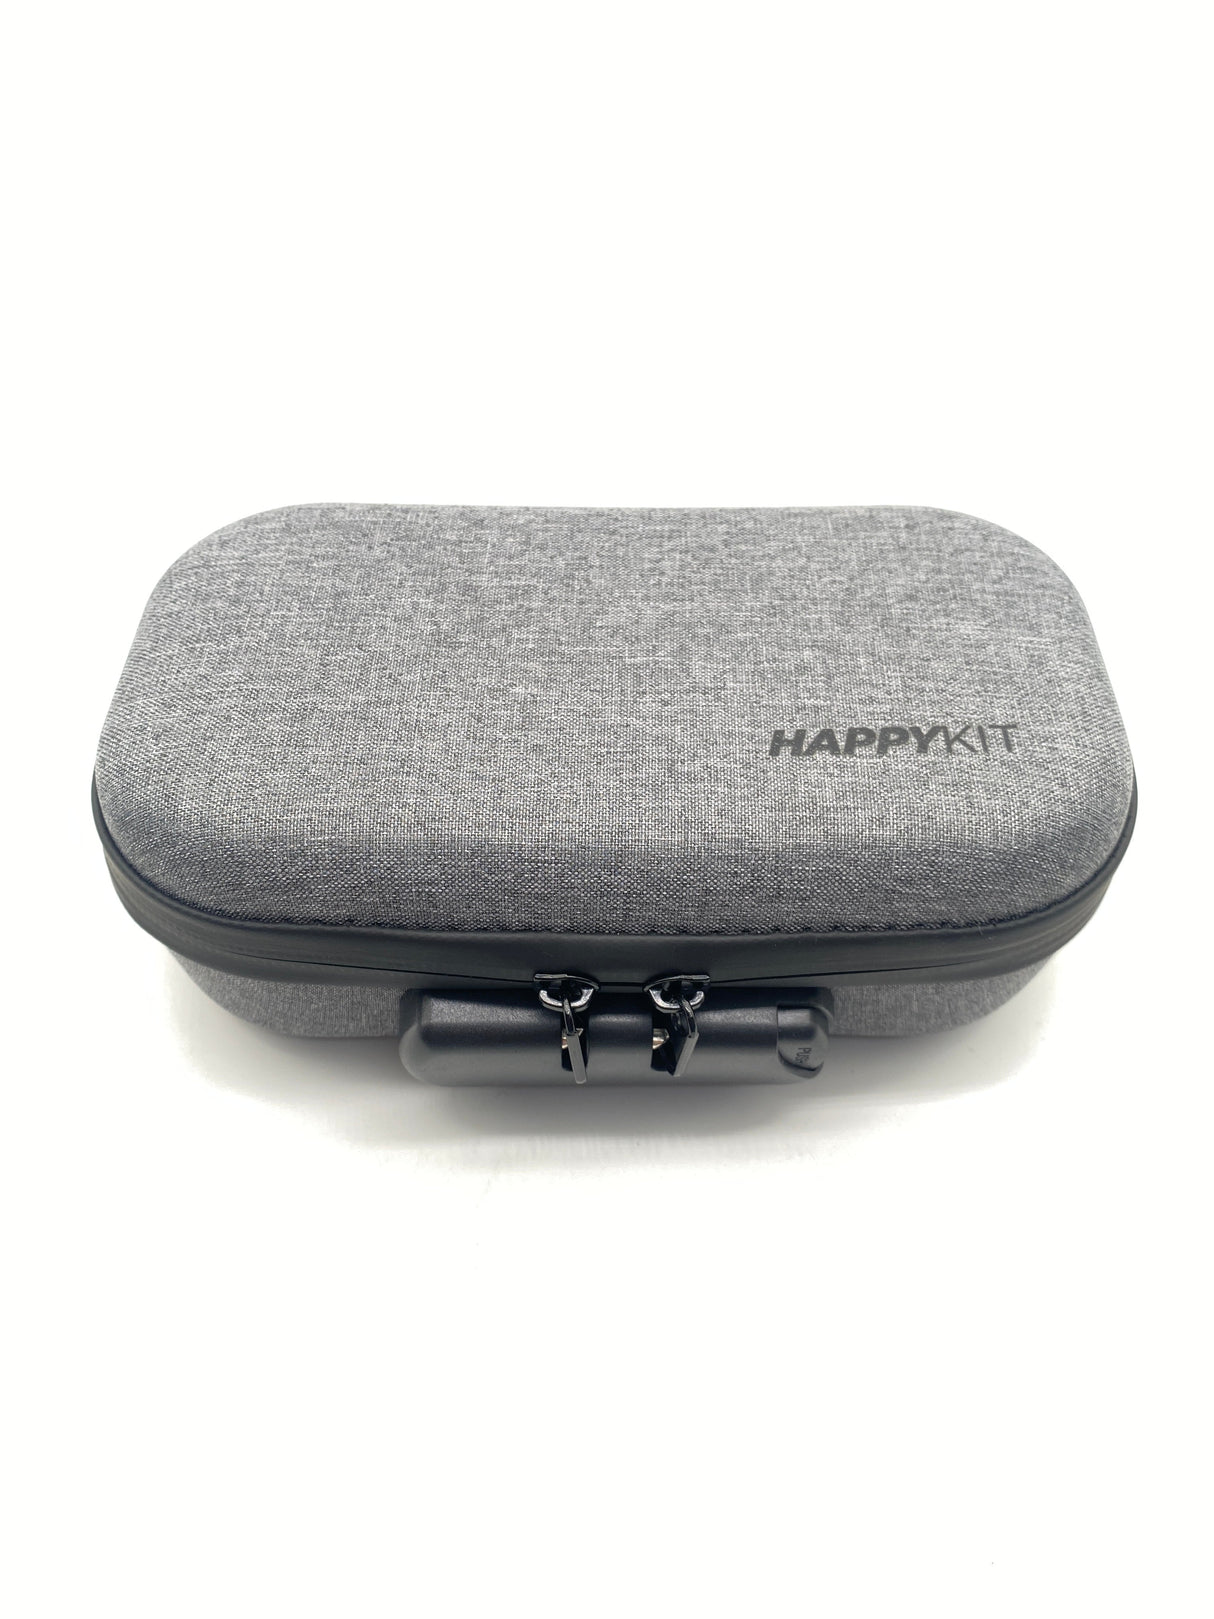 Very Happy Kit - DAB by Happy Kit in Gray, compact and portable with secure zipper, front view